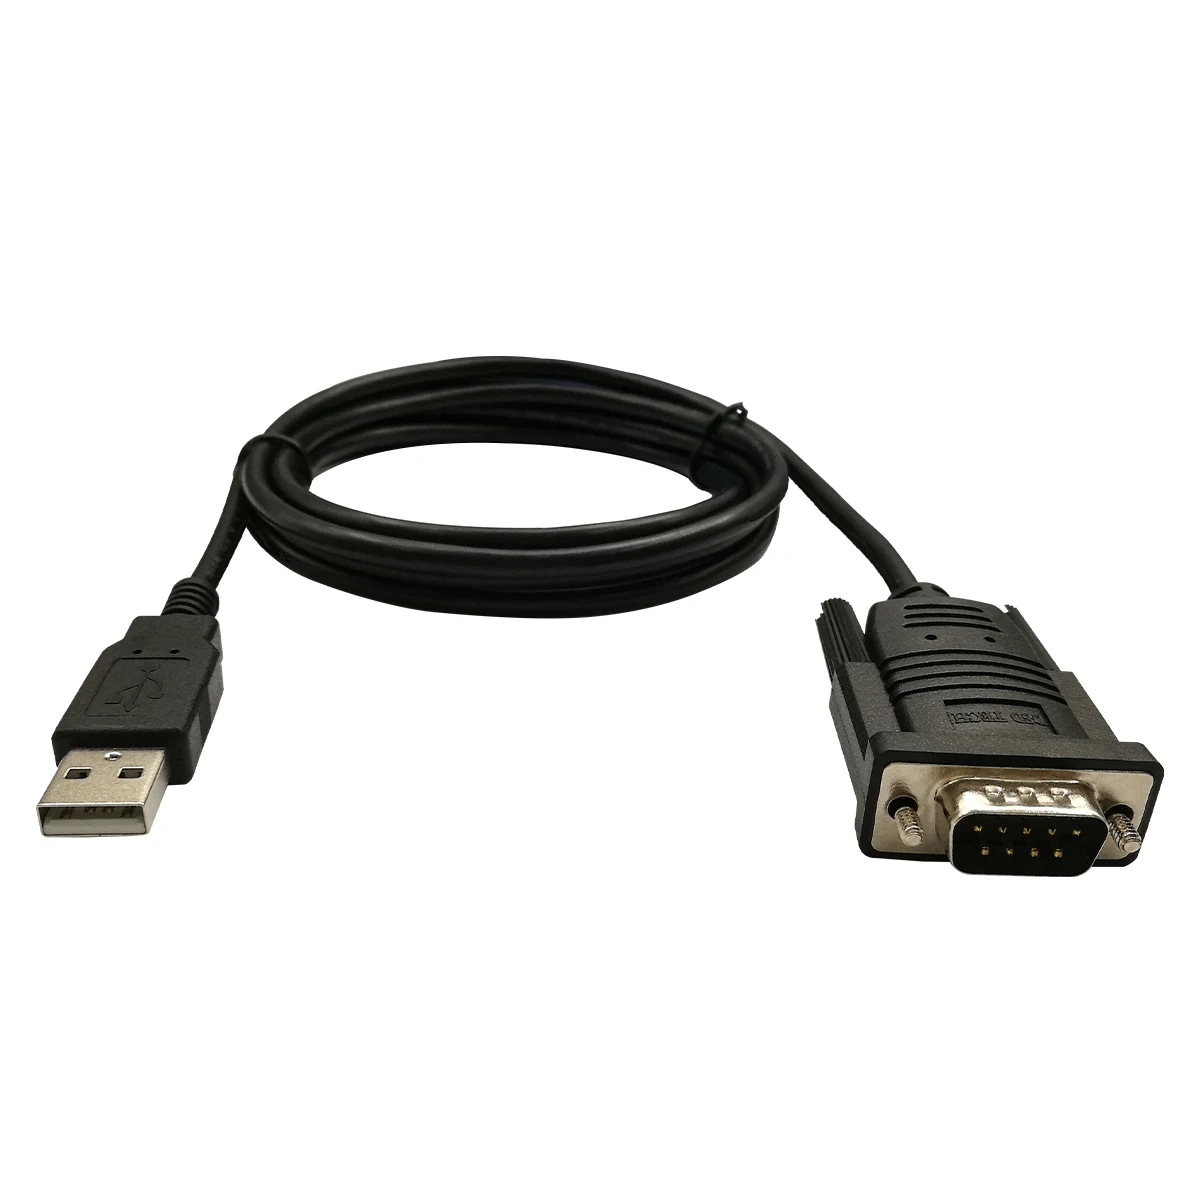 DSD TECH SH-RS232A USB to RS232 Serial DB9 Adapter Cable with FTDI FT232 Chip for Windows,Linux,Mac OS 5.9FT/1.8M